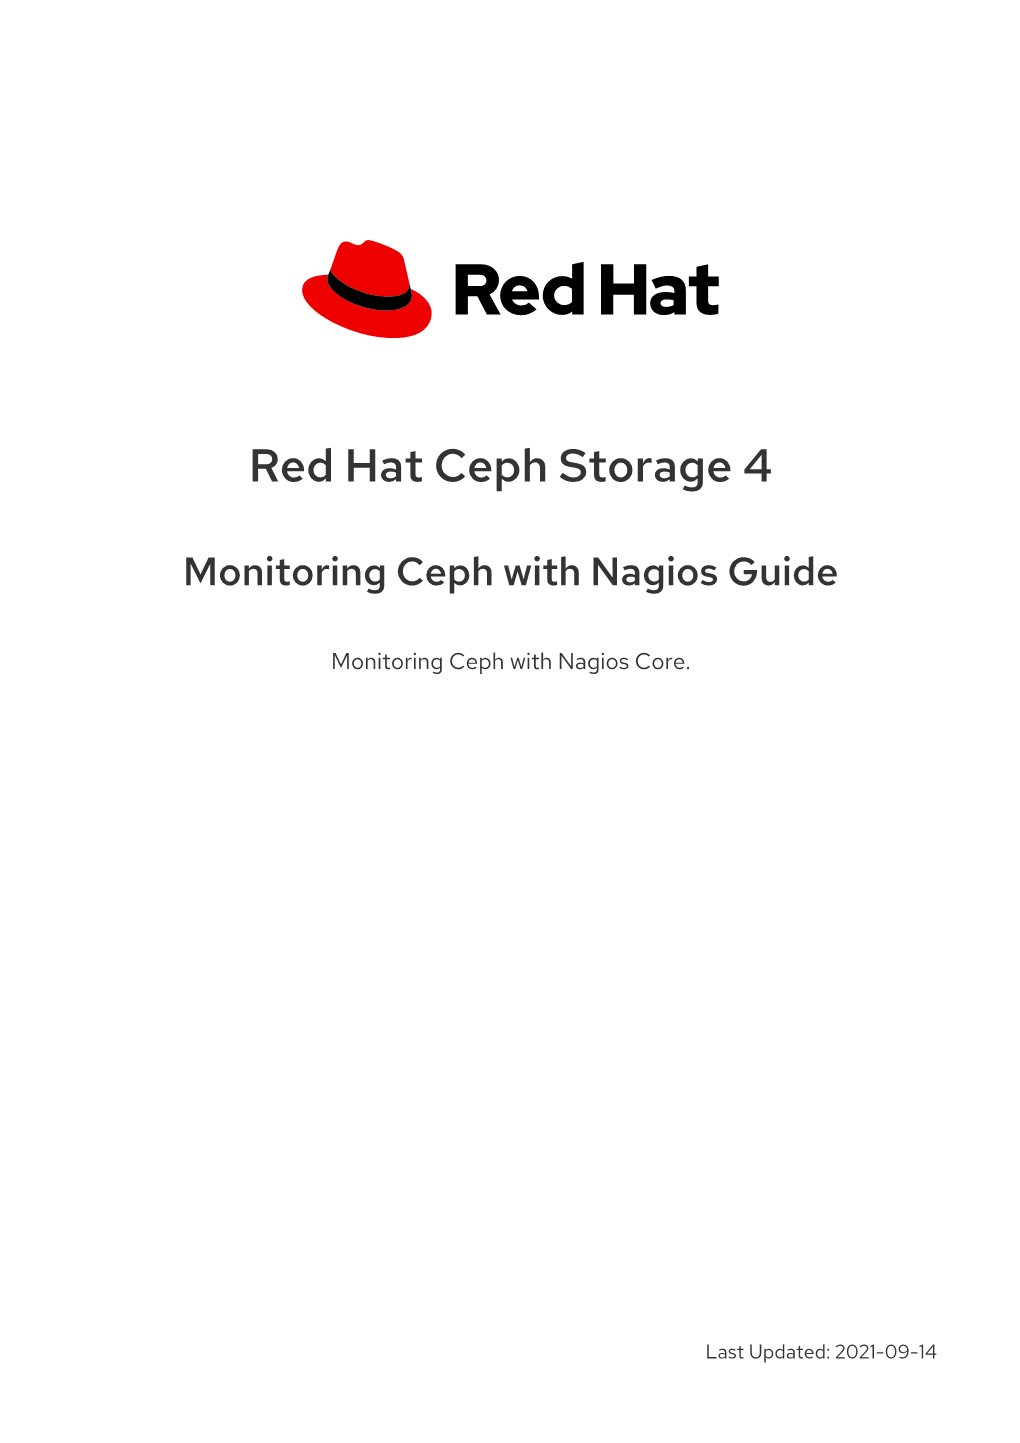 Red Hat Ceph Storage 4 Monitoring Ceph with Nagios Guide